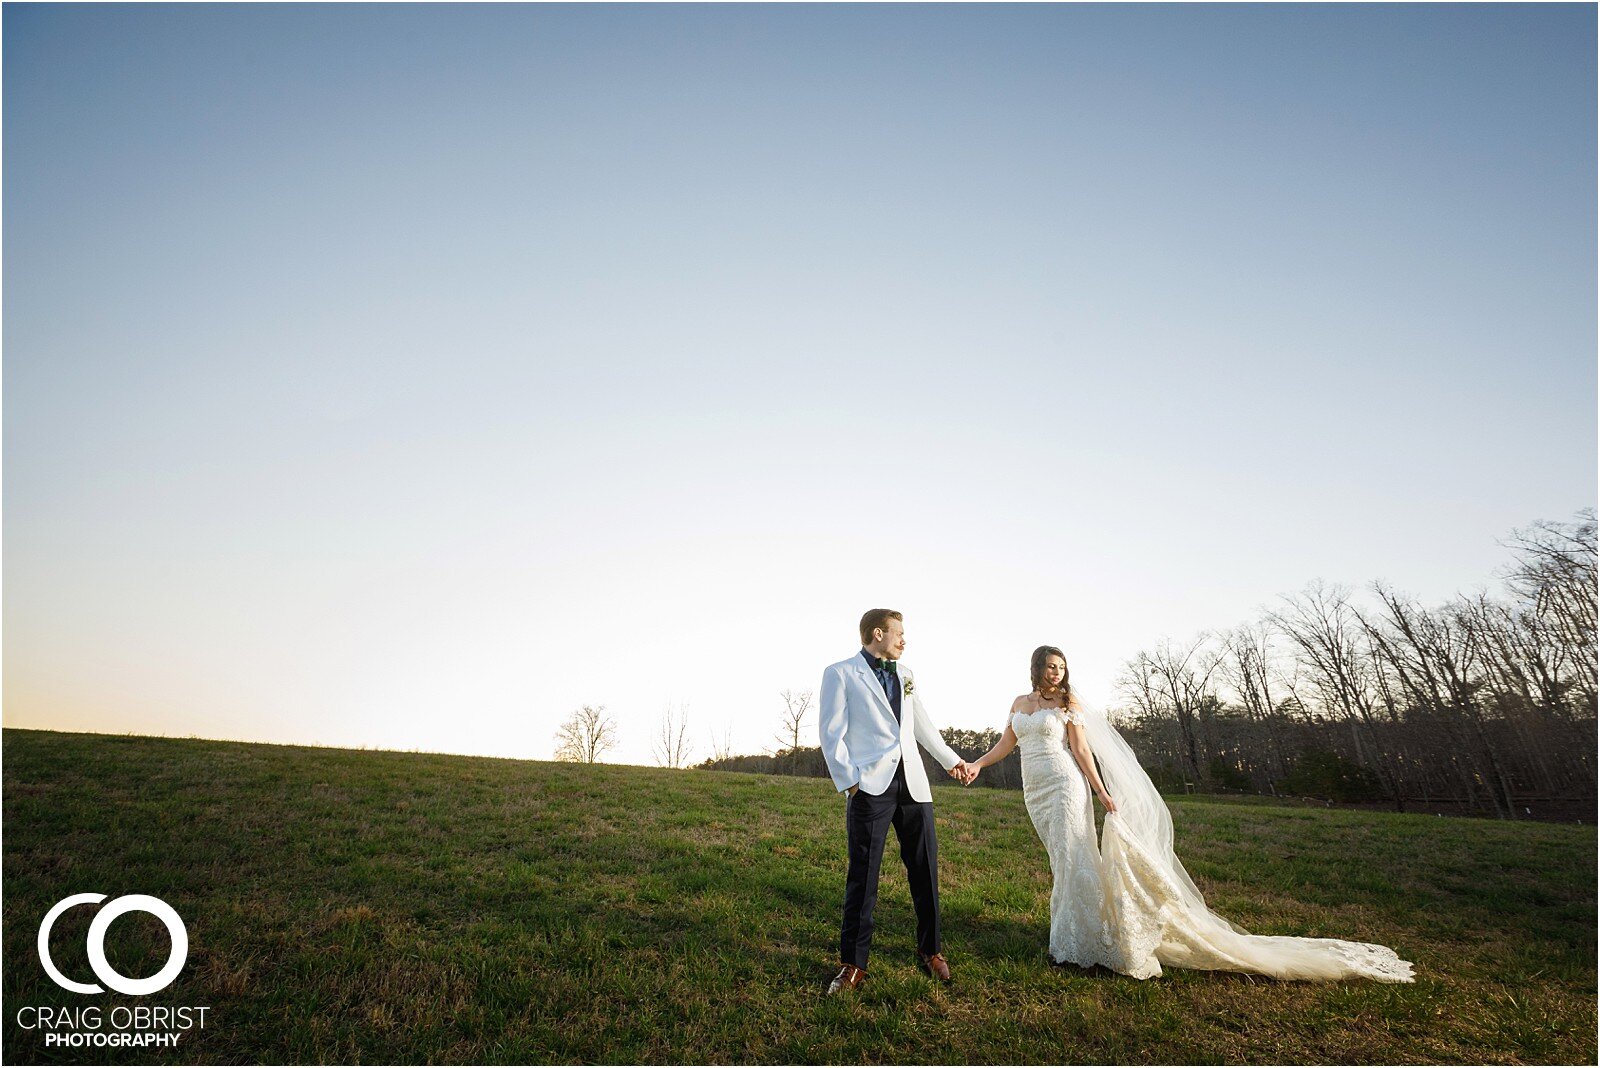 in the woods events wedding portraits sunset photographer_0102.jpg